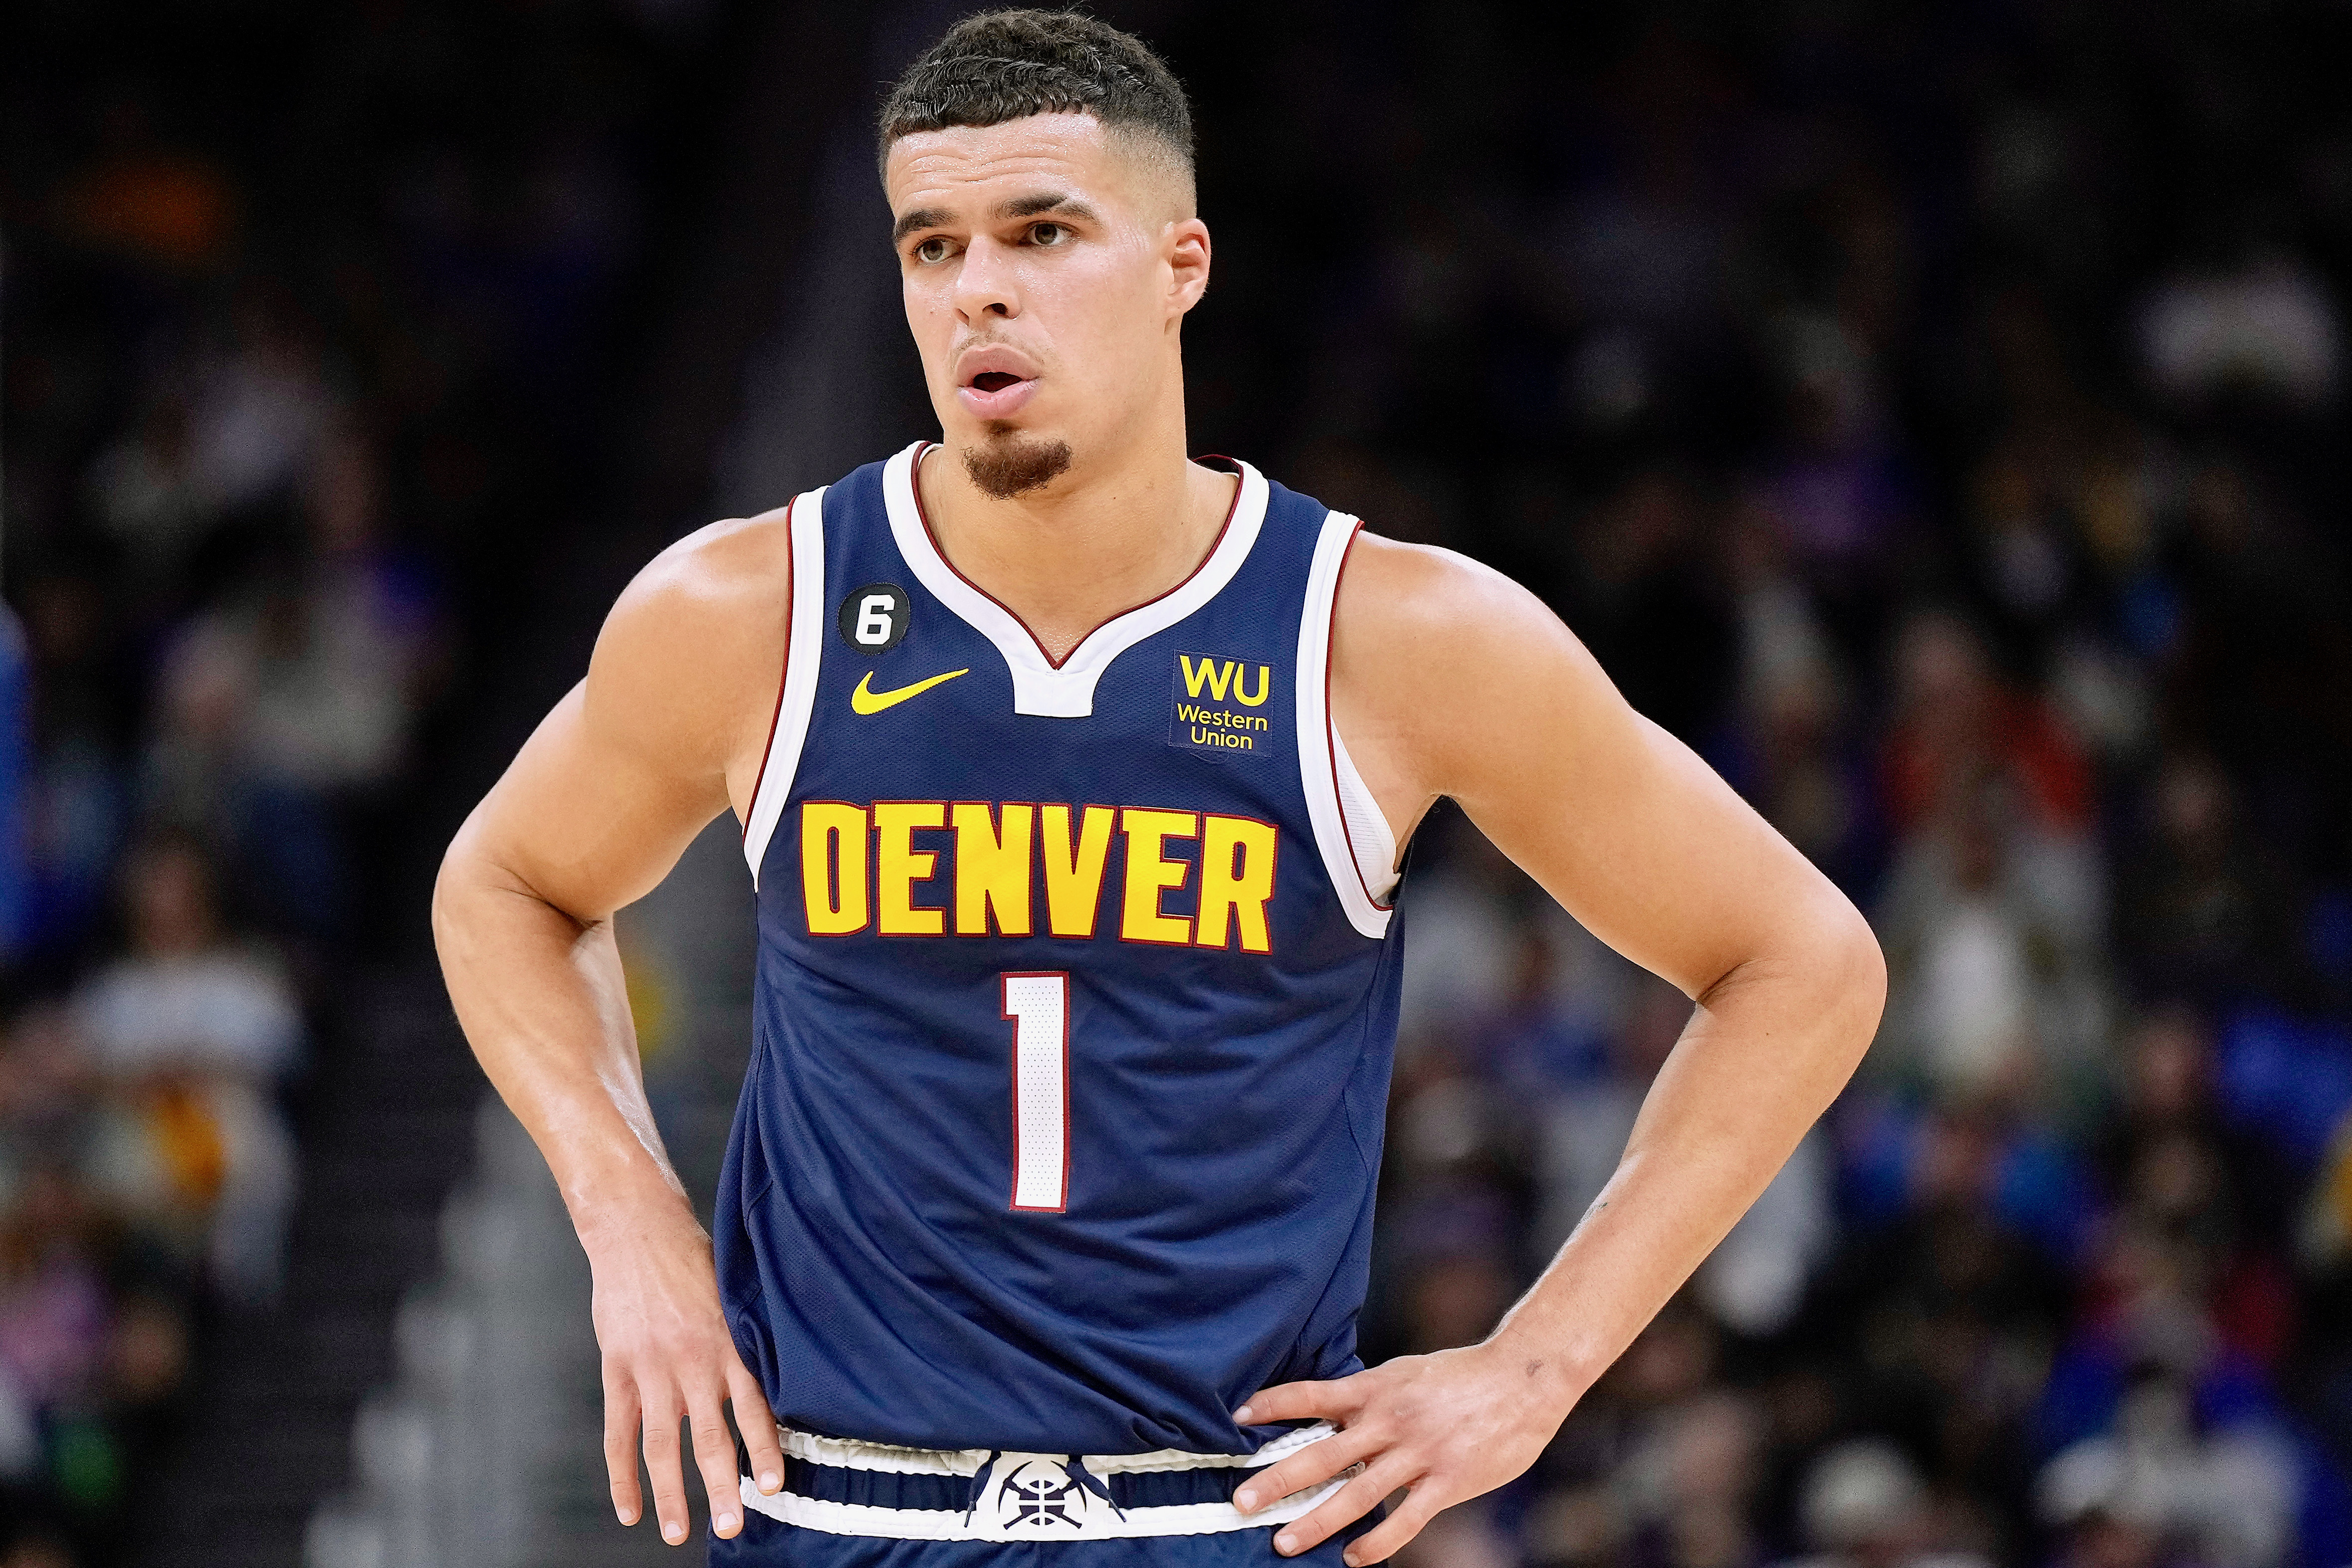 If Michael Porter Jr. keeps playing like this, the NBA is in trouble